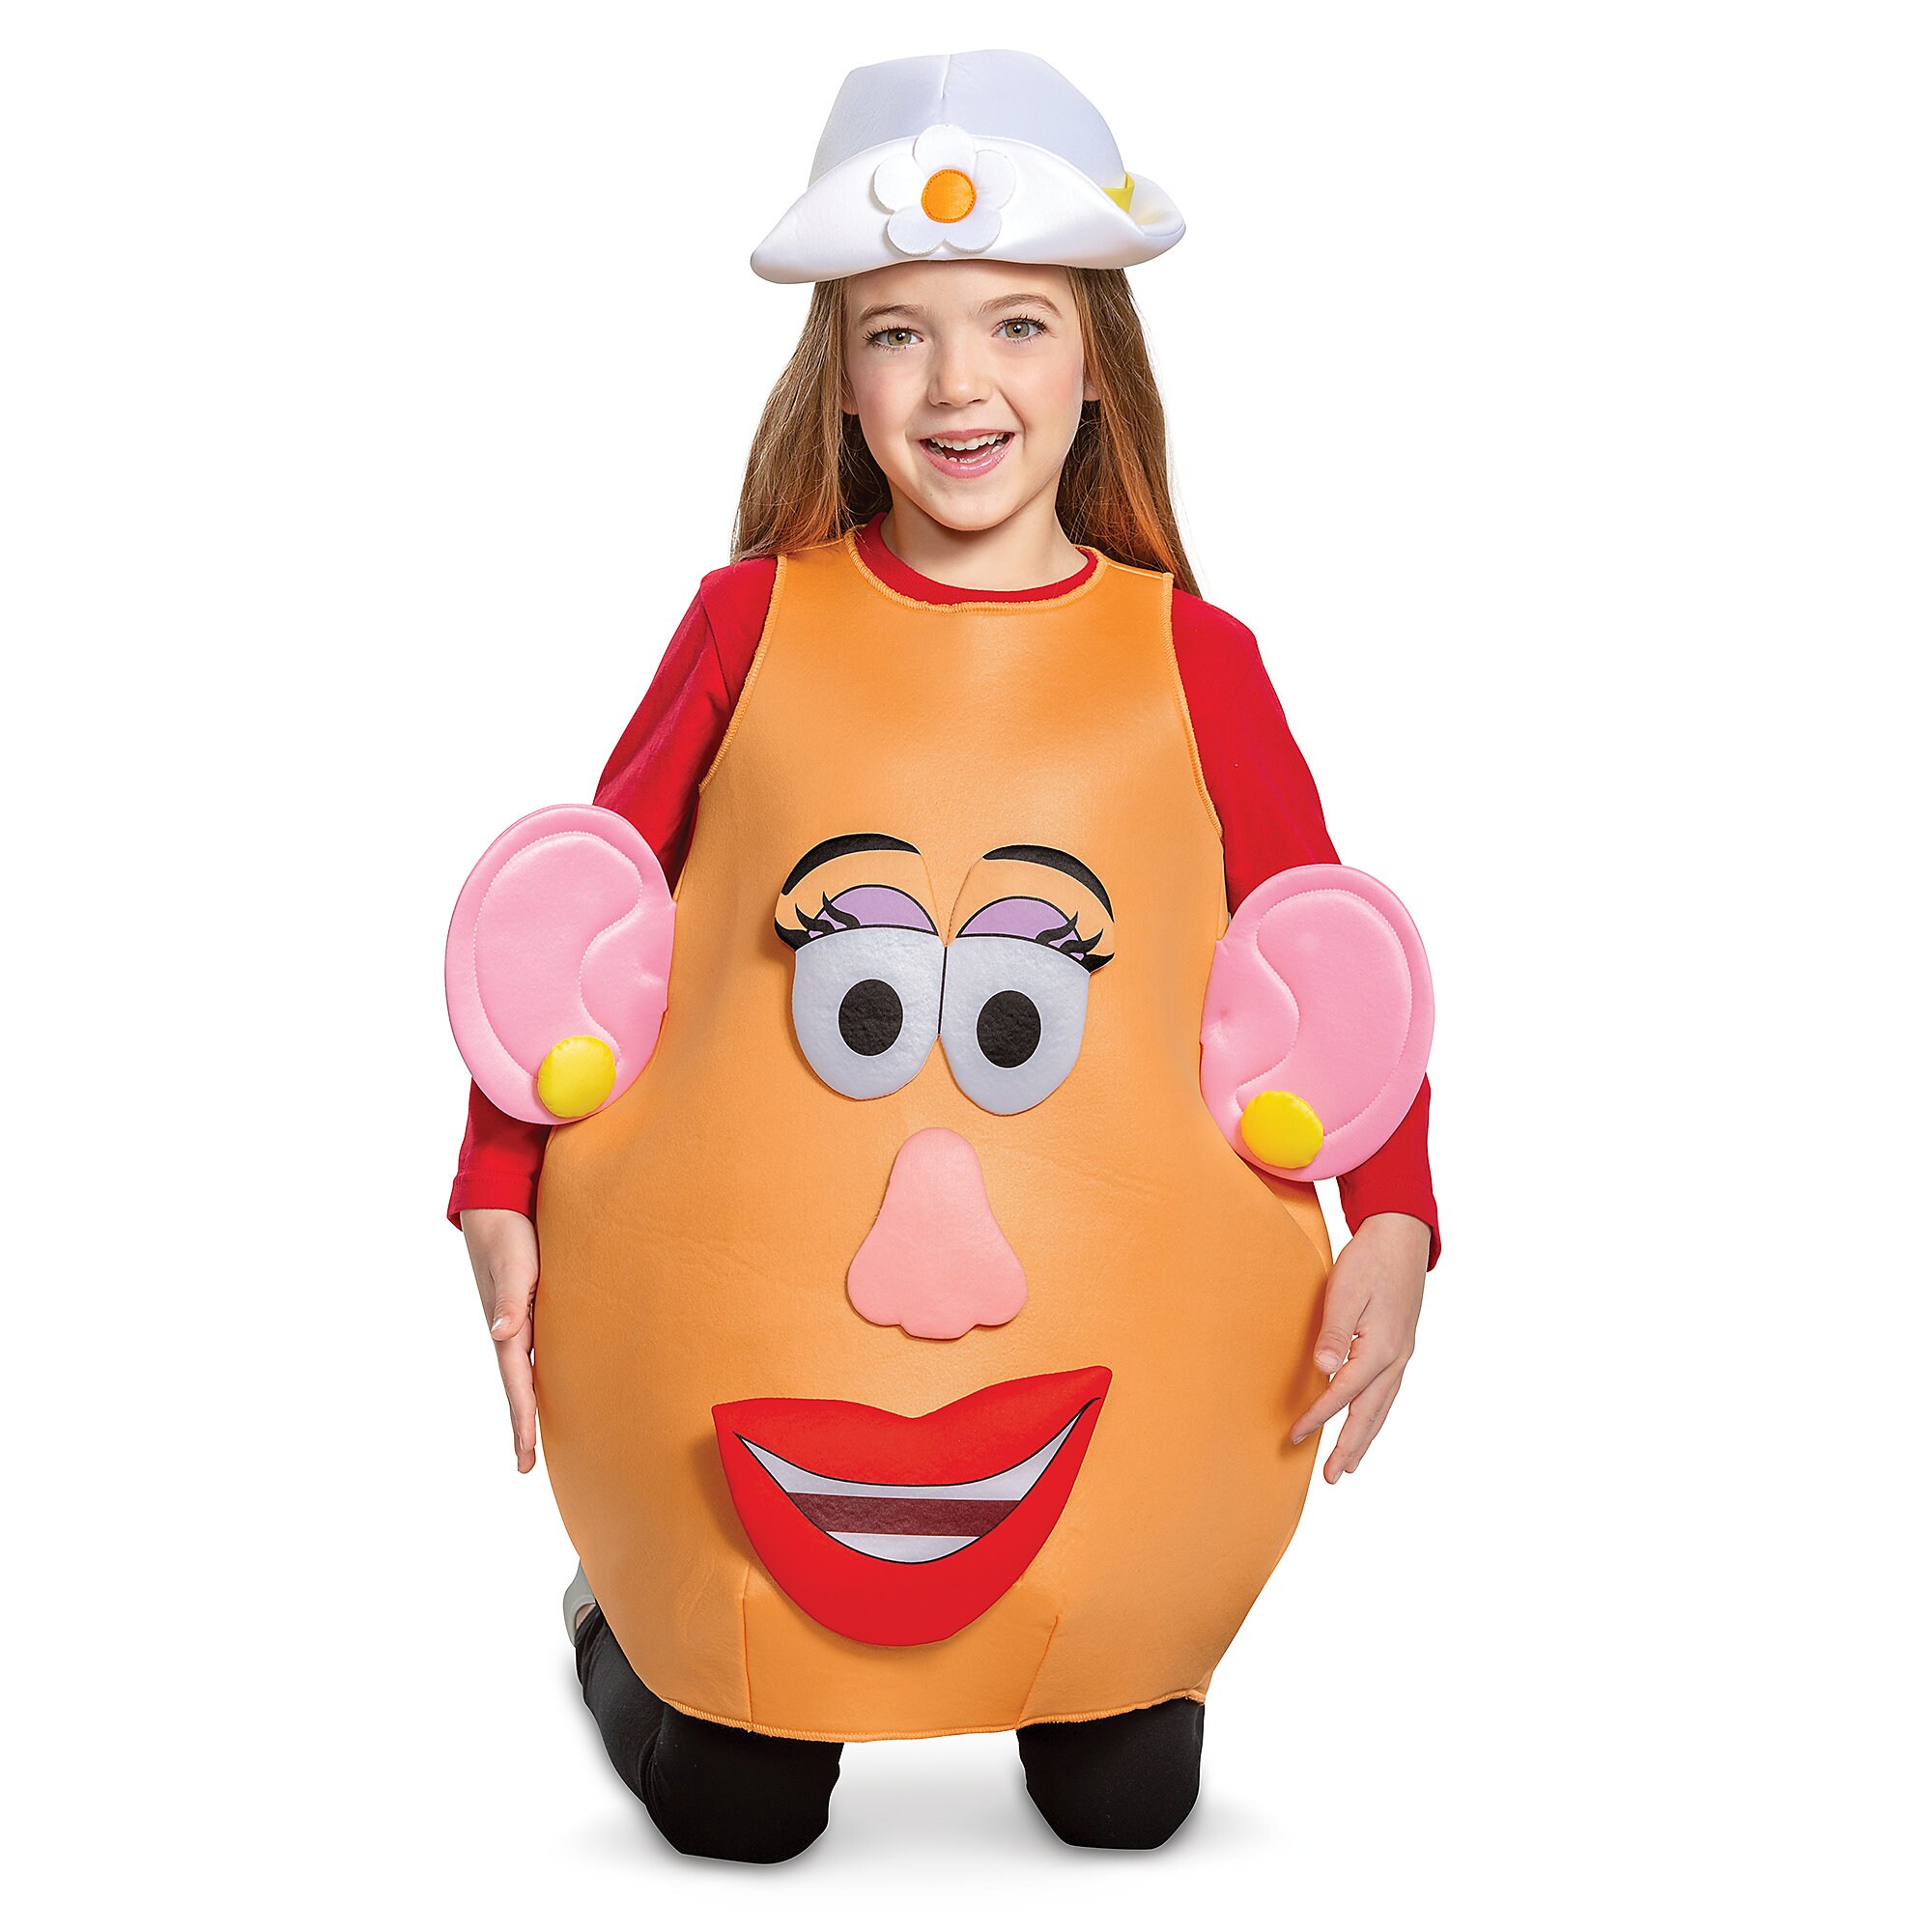 Mr. and Mrs. Potato Head Deluxe Costume for Kids - Toy Story